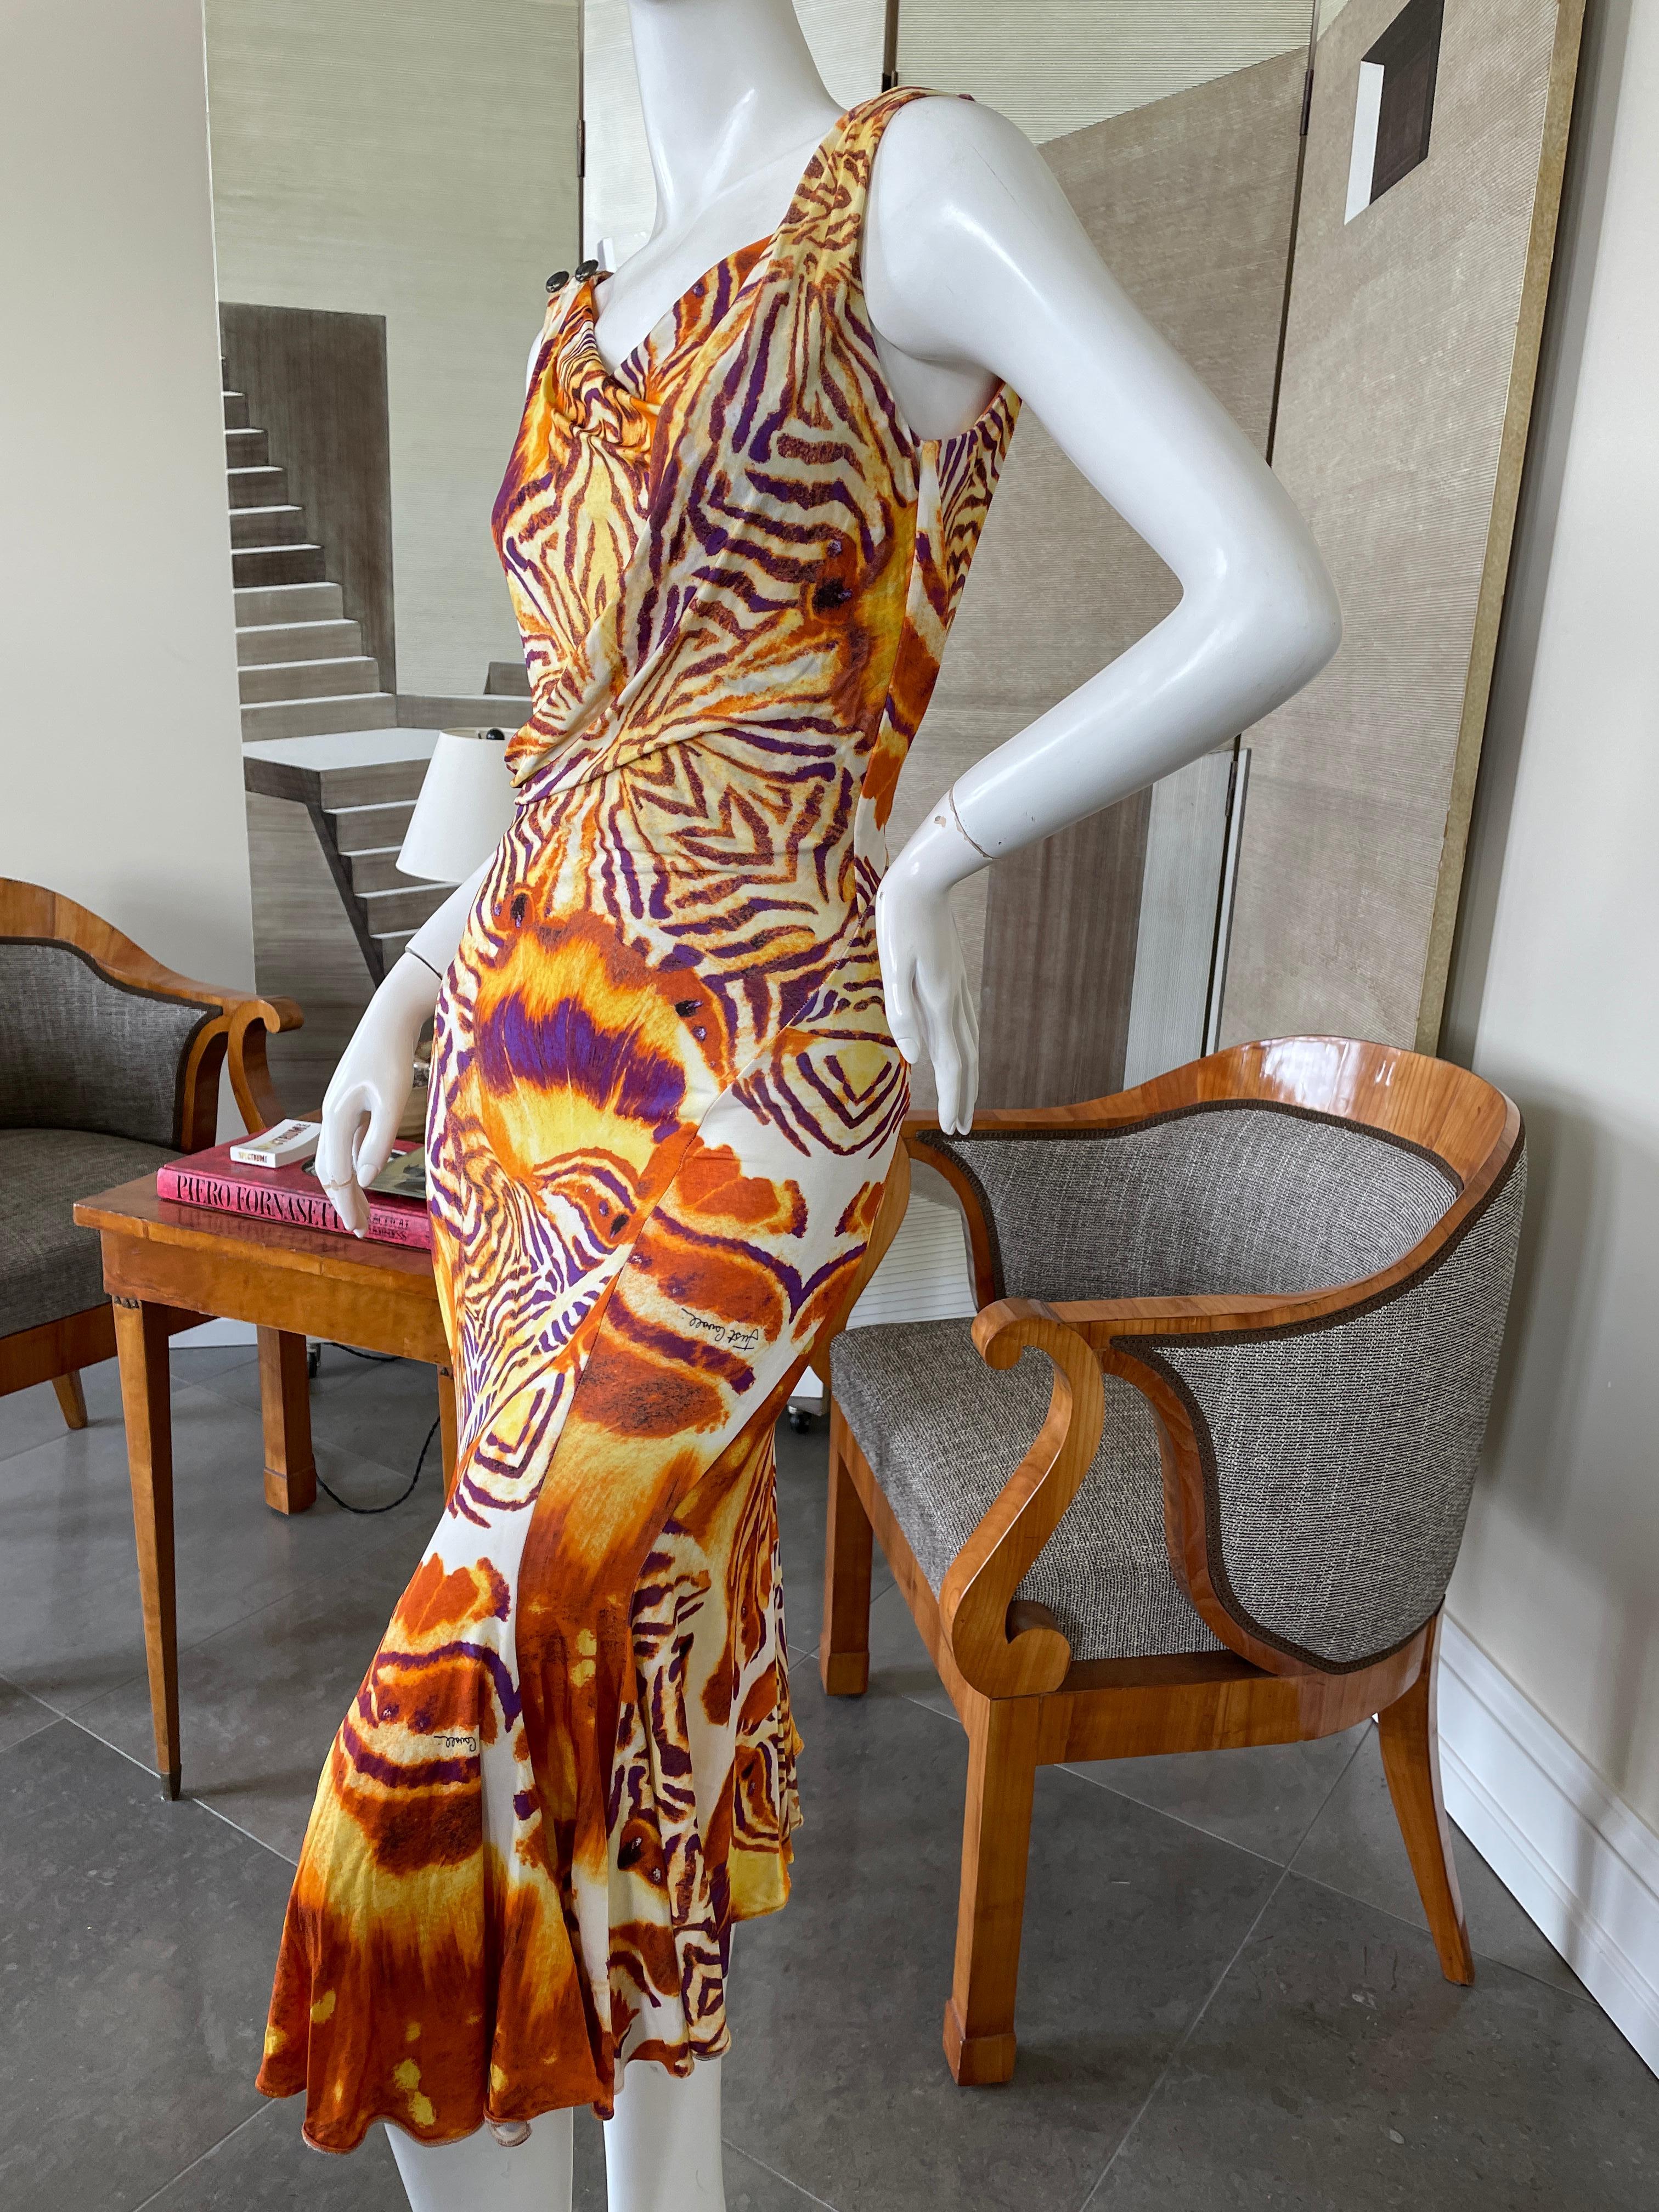 Just Cavalli Colorful Animal Print Cocktail Dress by Roberto Cavalli In Excellent Condition For Sale In Cloverdale, CA